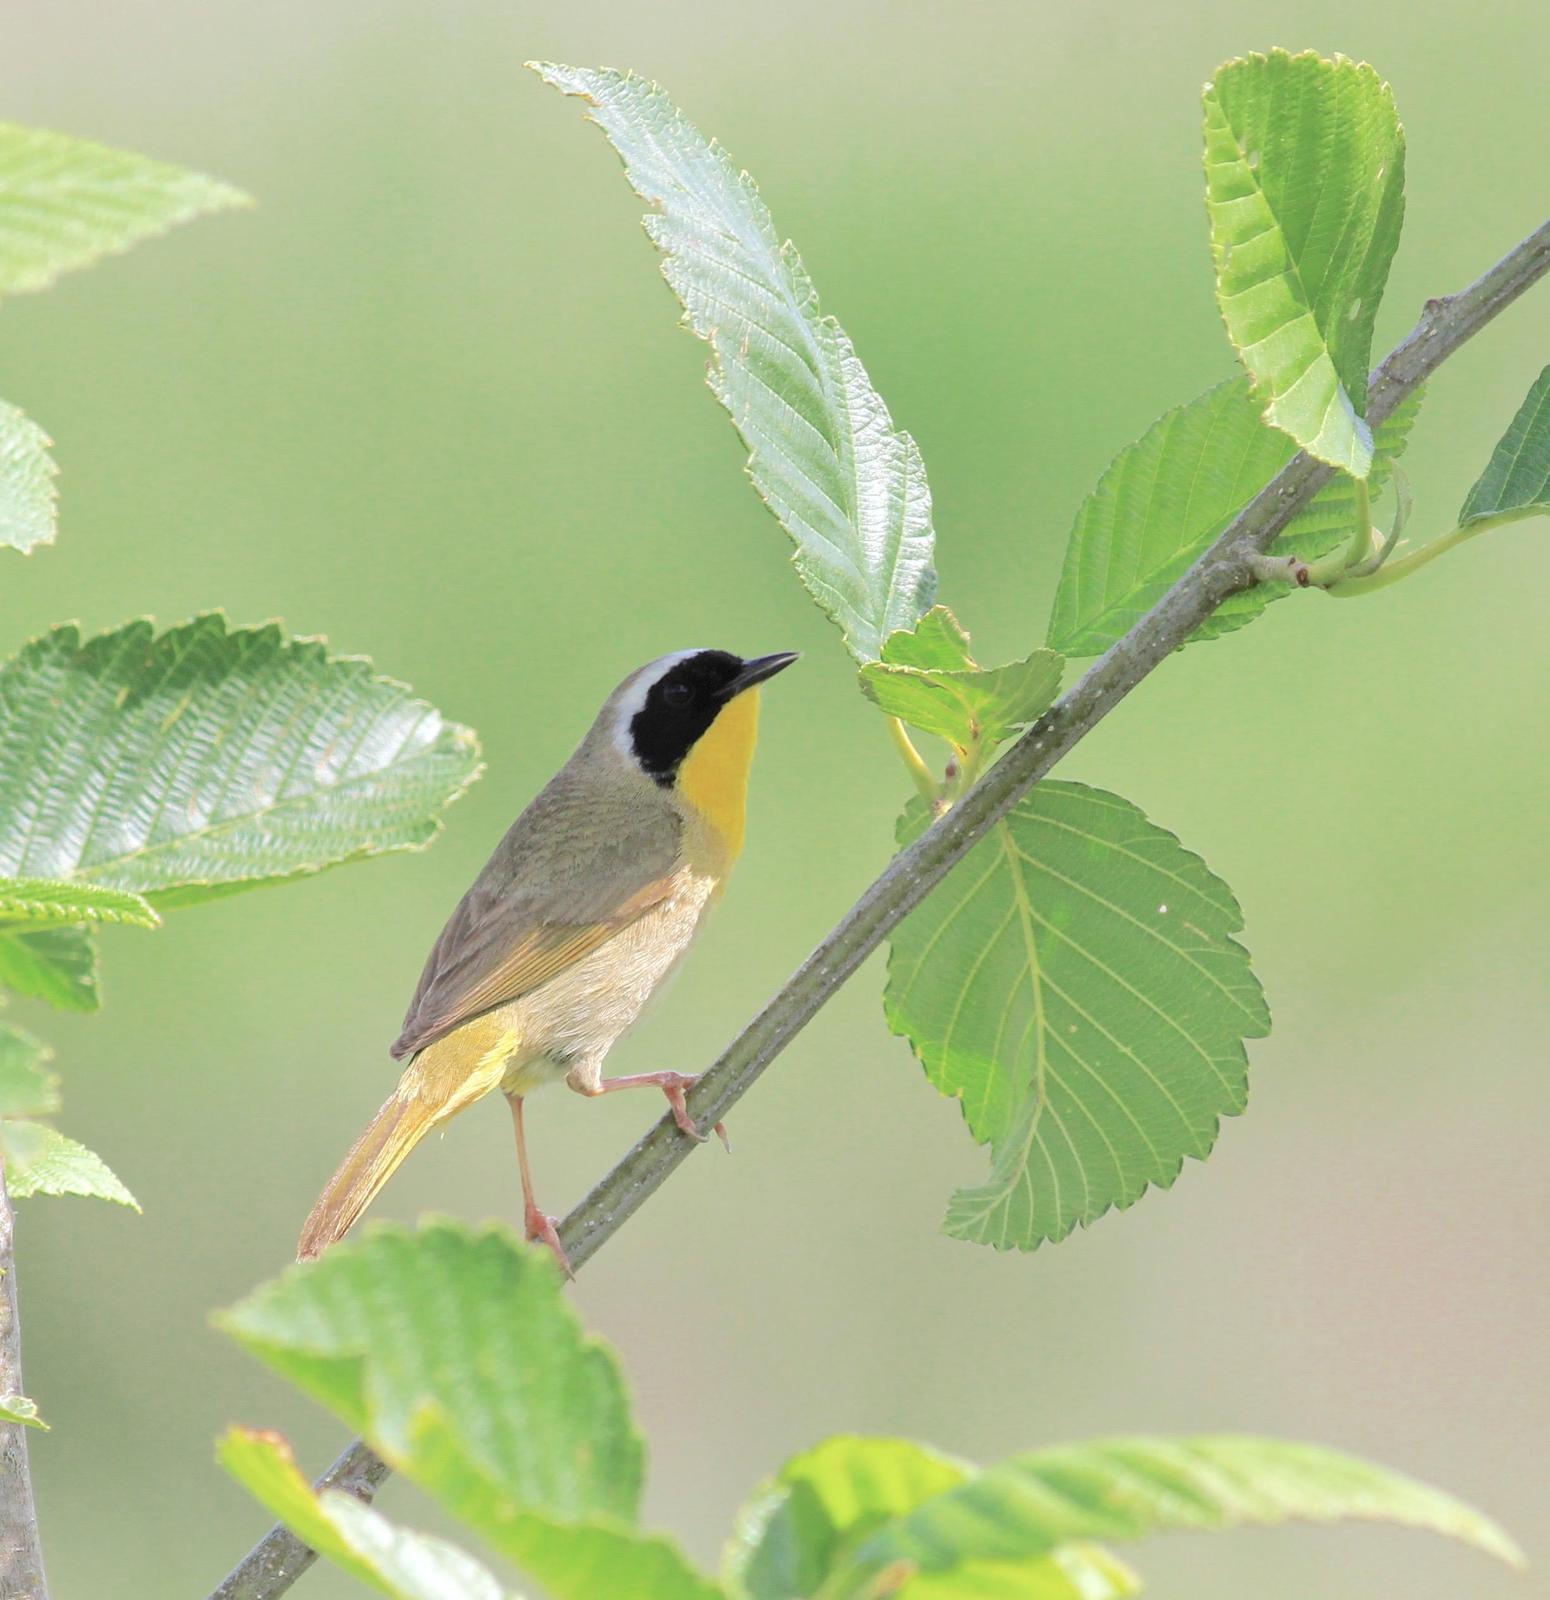 Common Yellowthroat Photo by Kathryn Keith